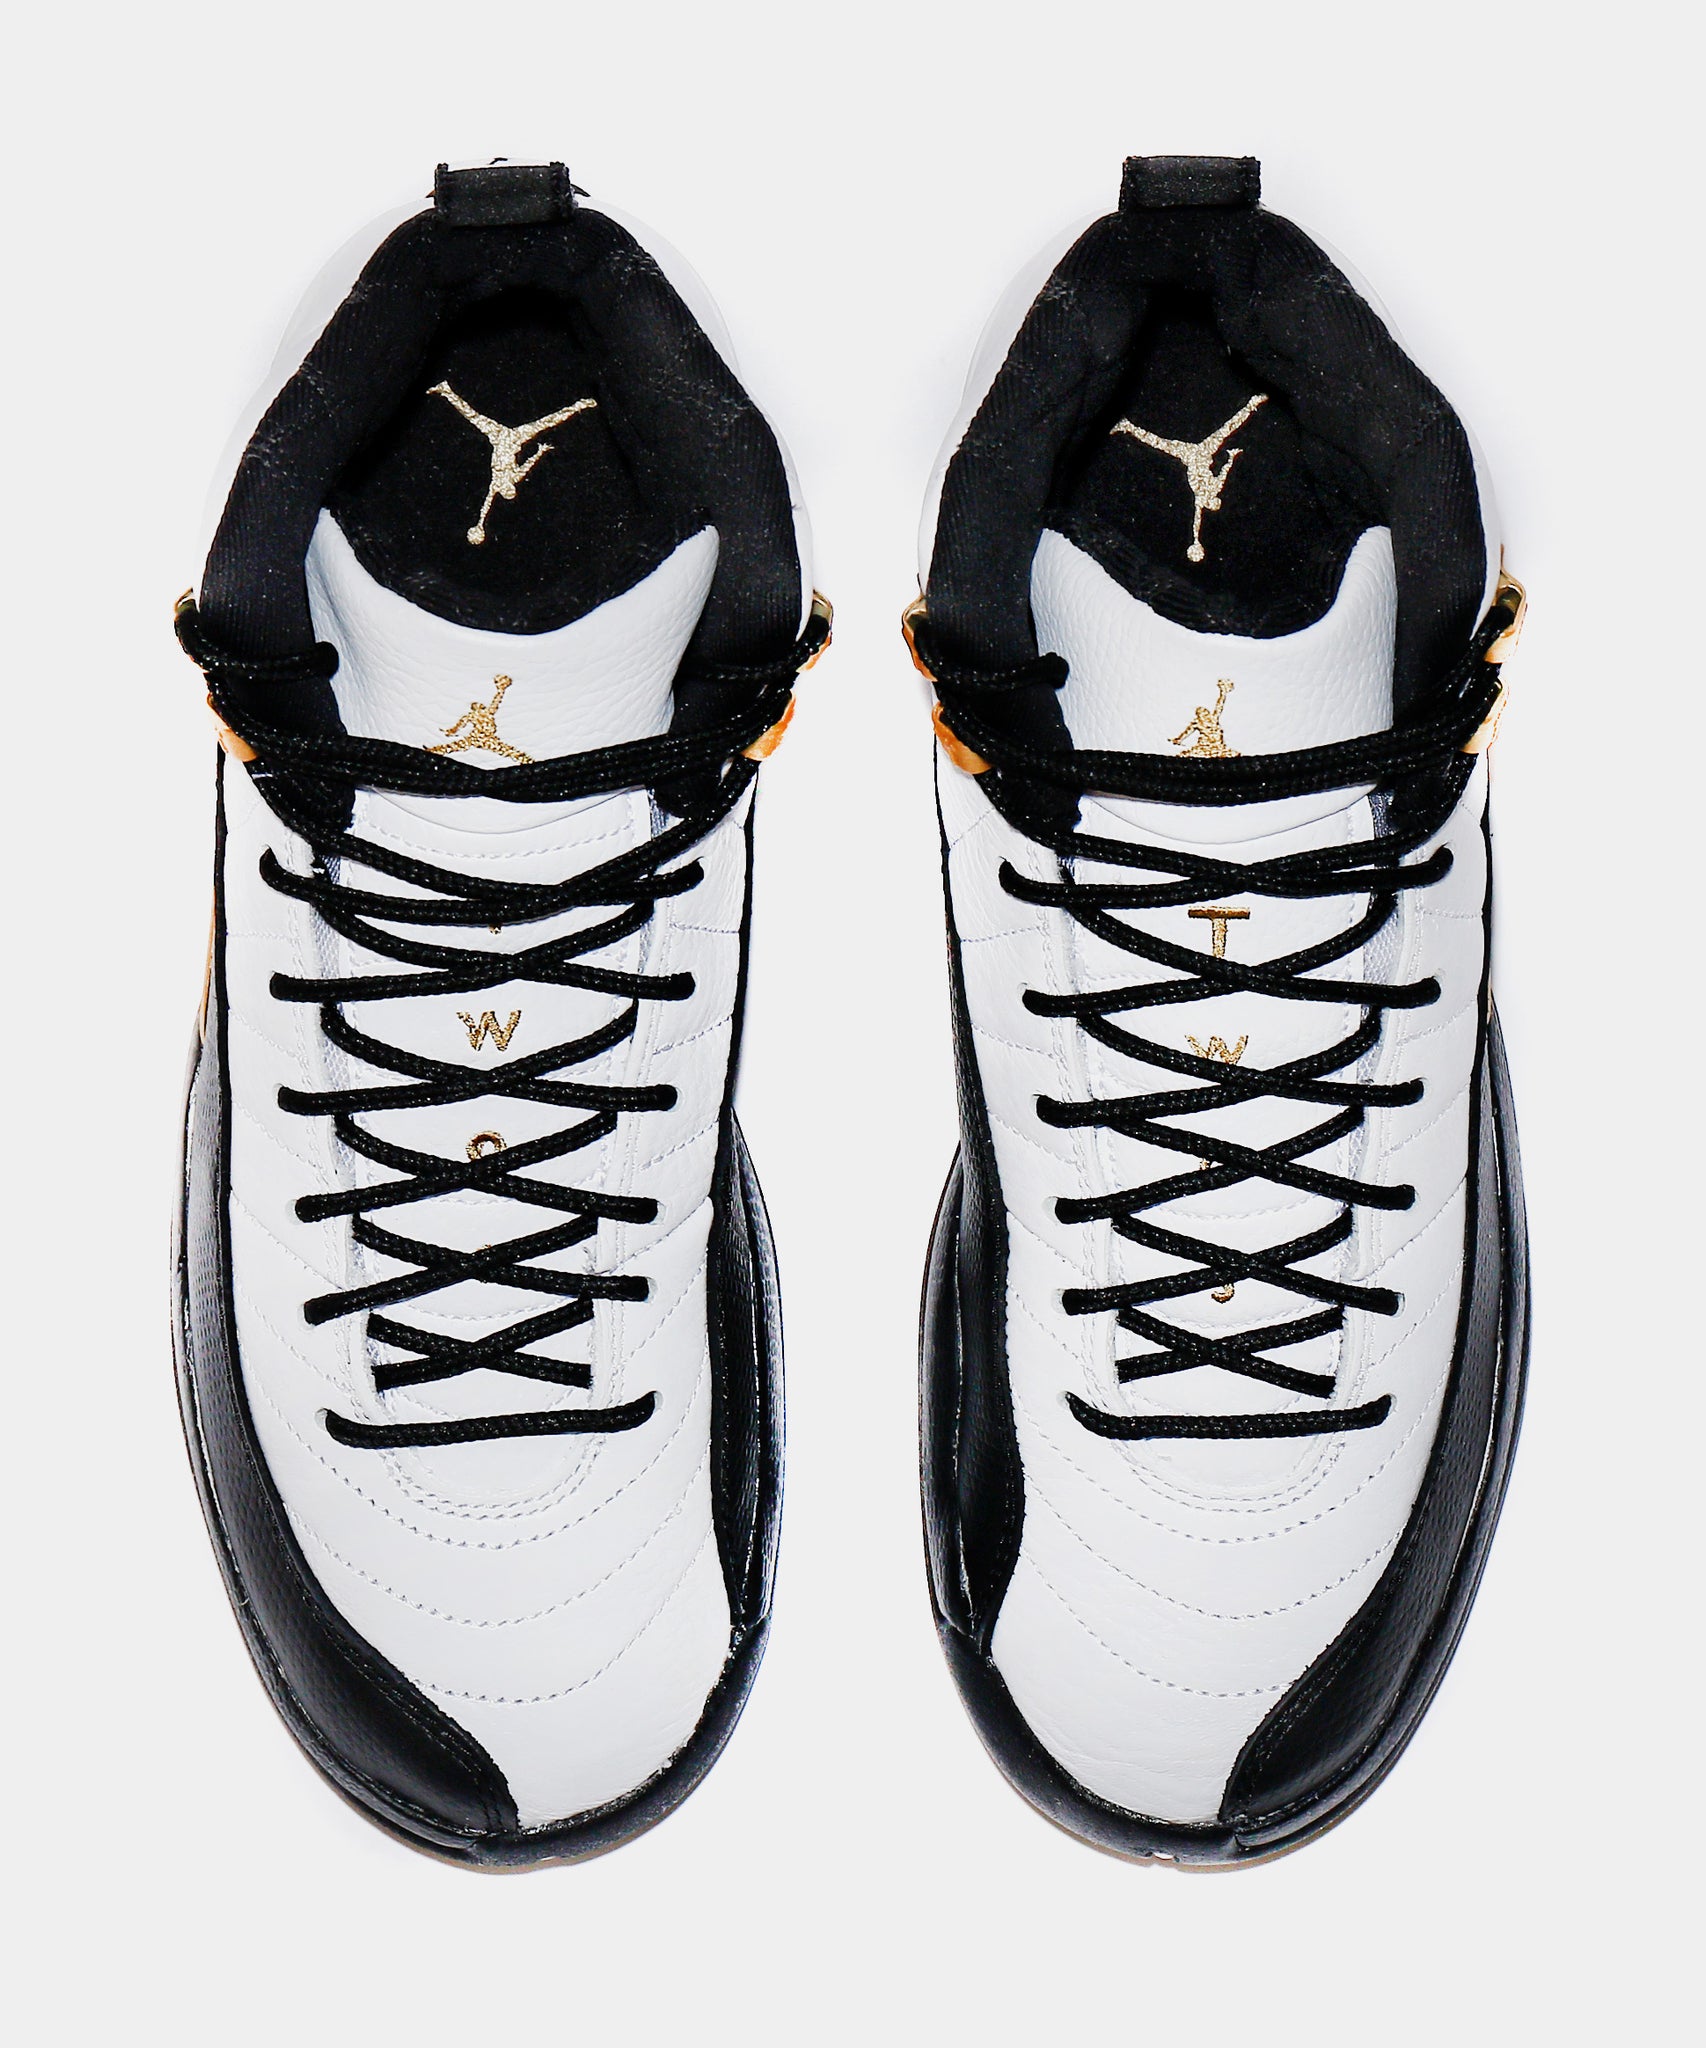 black and gold 12s